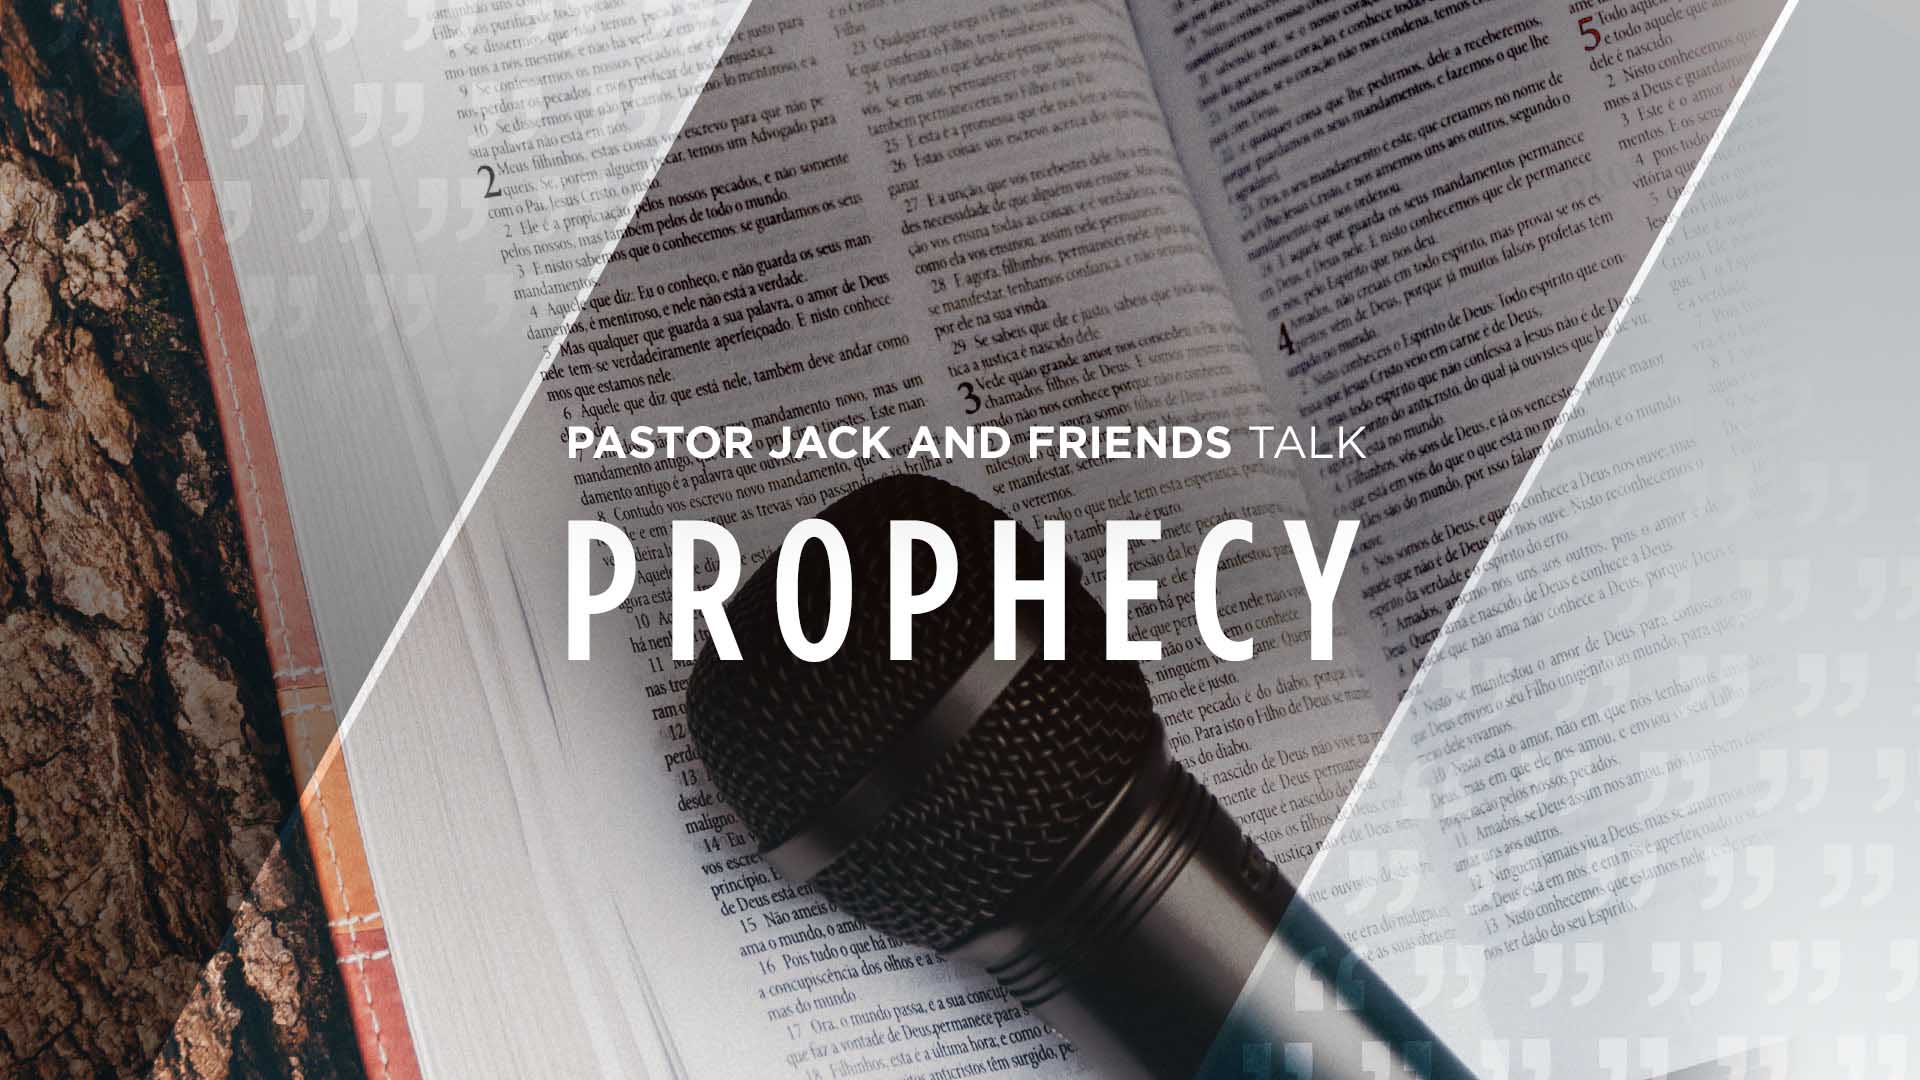 Jack Hibbs and Friends Talk Bible Prophecy